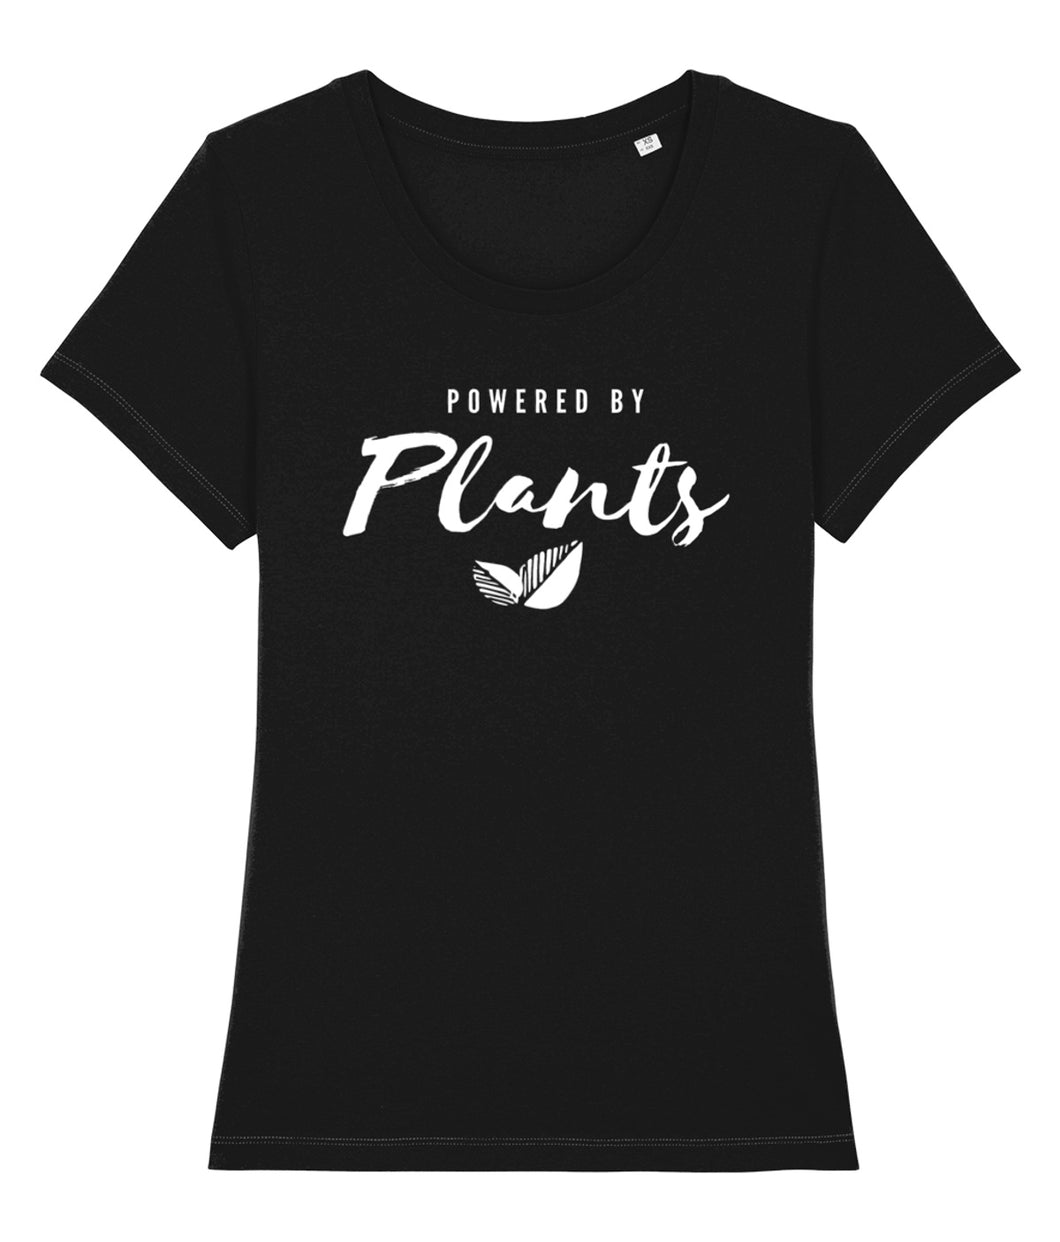 Black powered by plants t-shirt